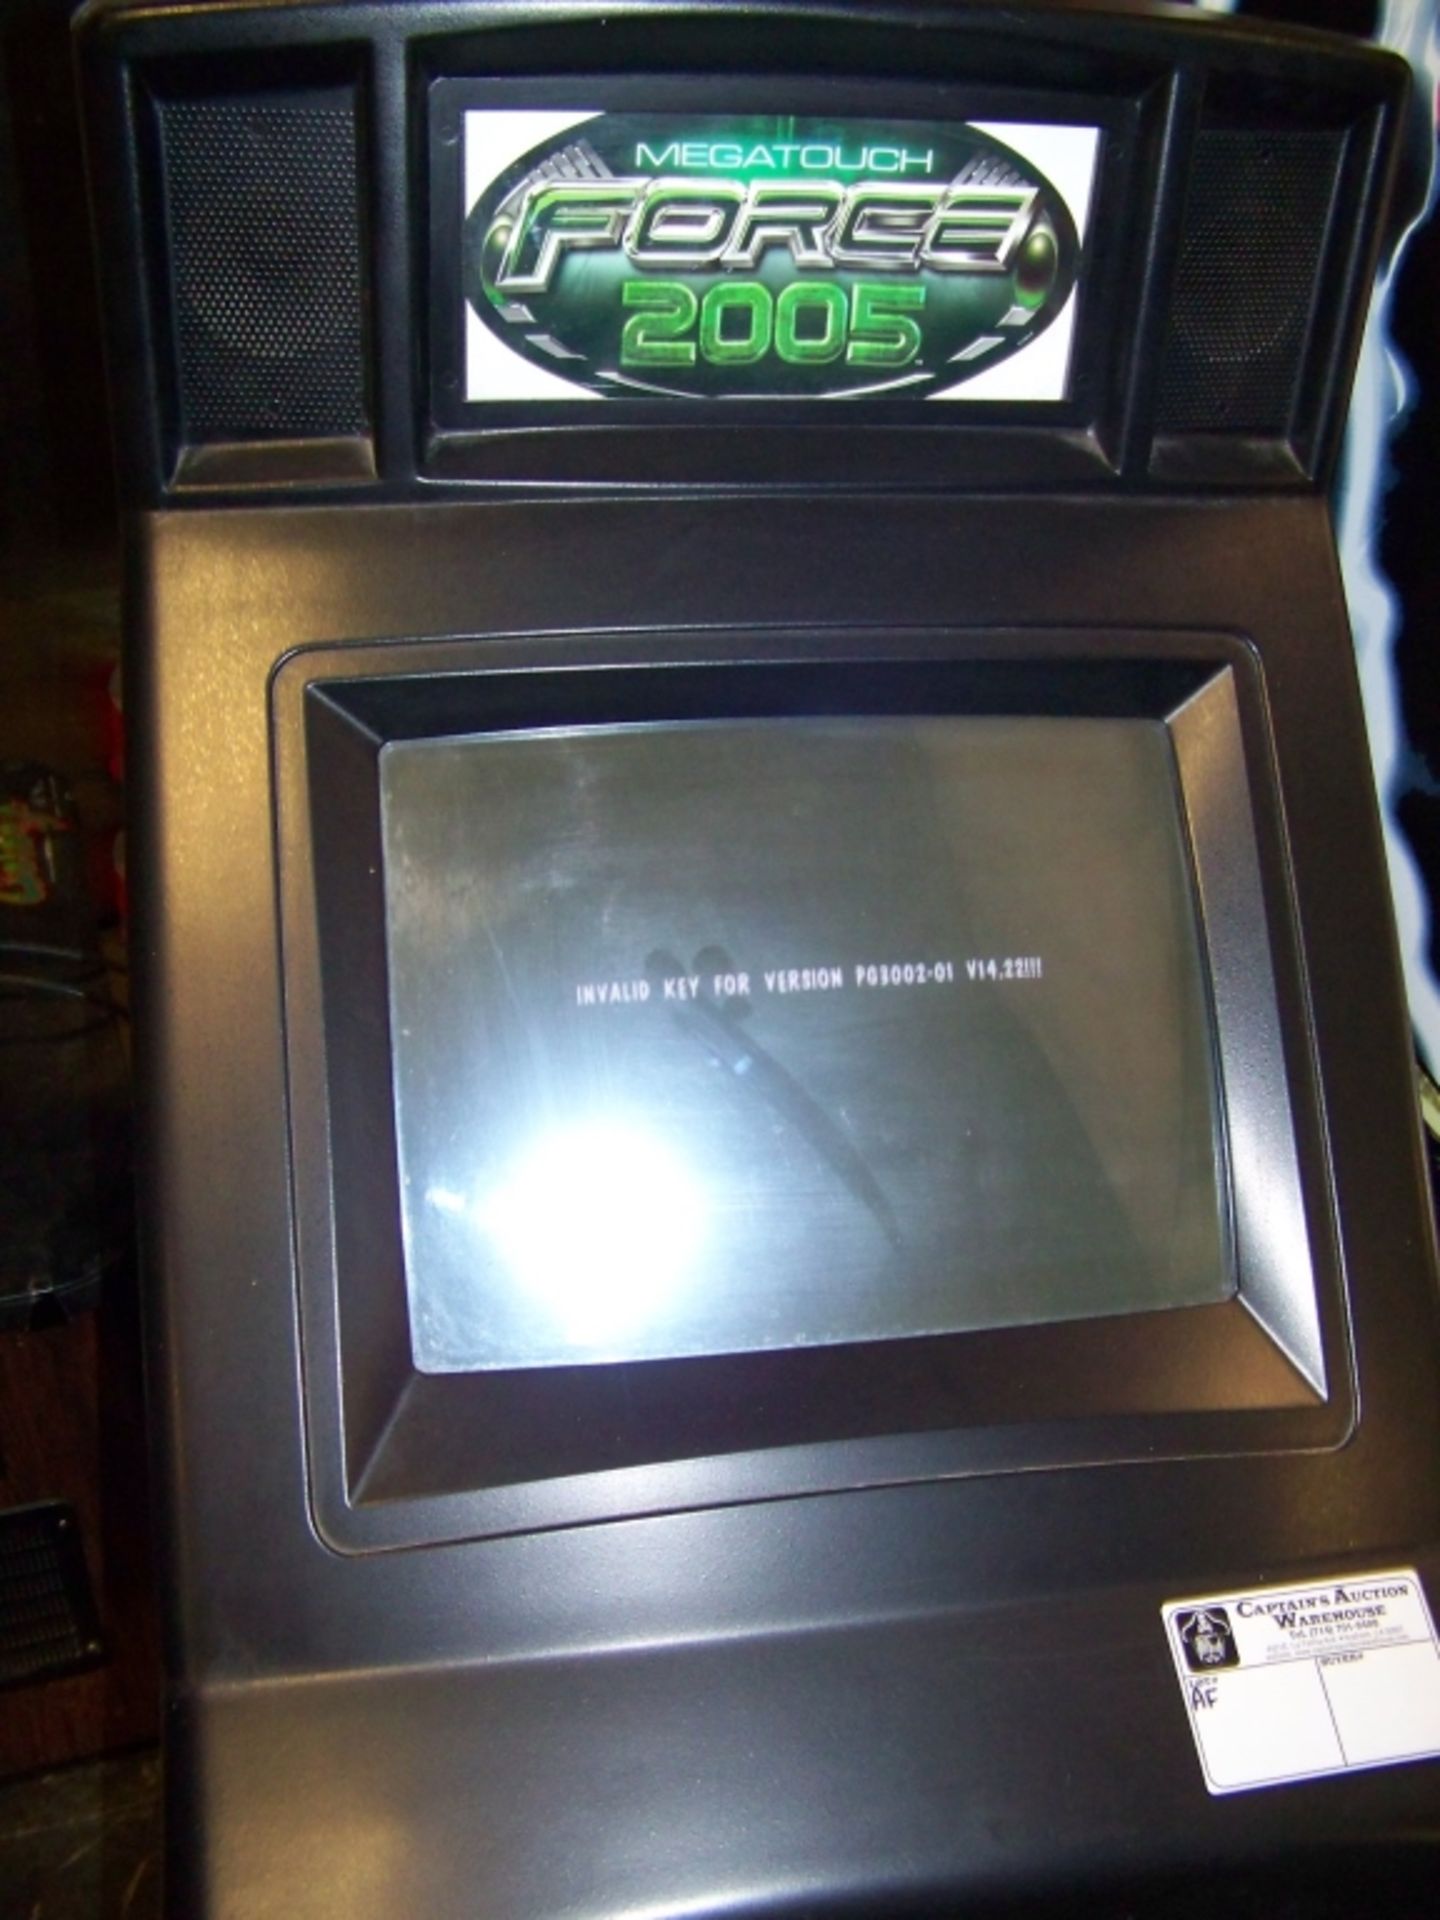 MEGATOUCH FORCE 2005 UPRIGHT ARCADE GAME Item is in used condition. Evidence of wear and - Image 3 of 3